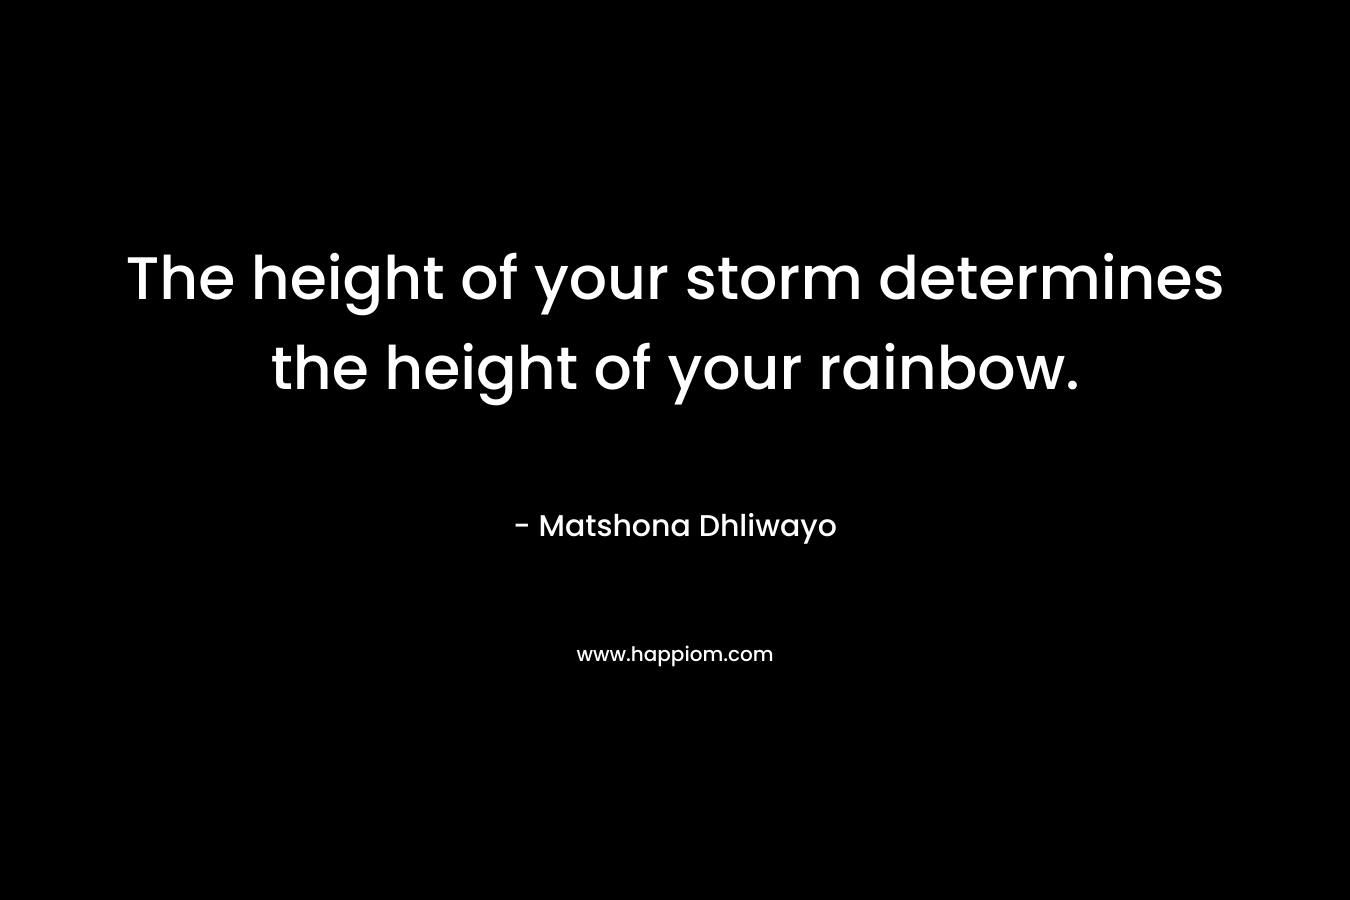 The height of your storm determines the height of your rainbow.